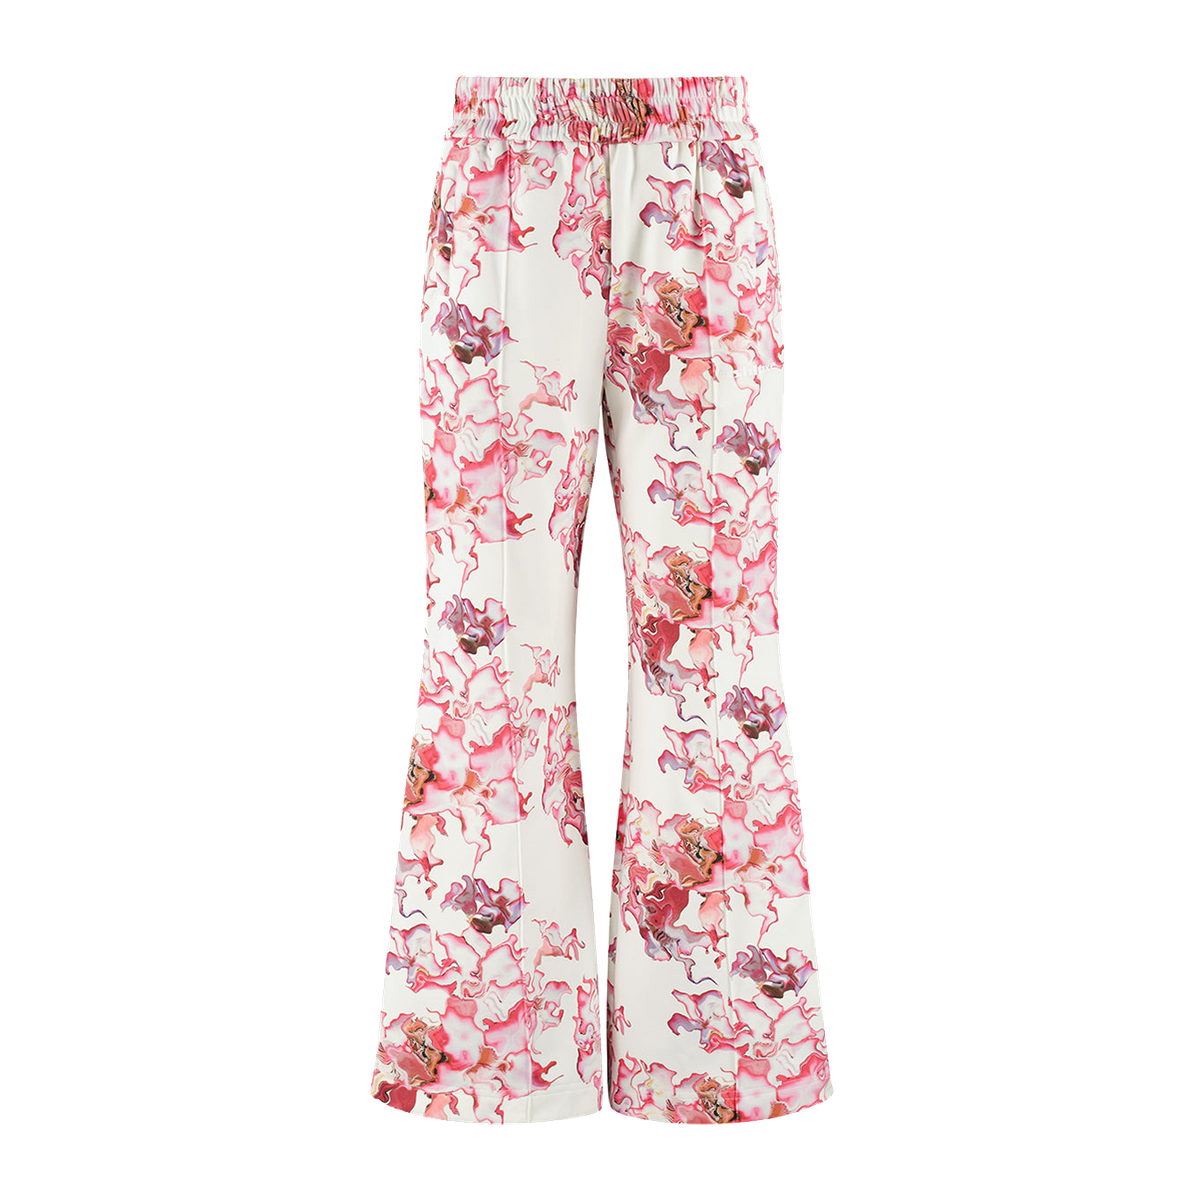 Ashluxe Female Flared Pants Pink Flower Aop